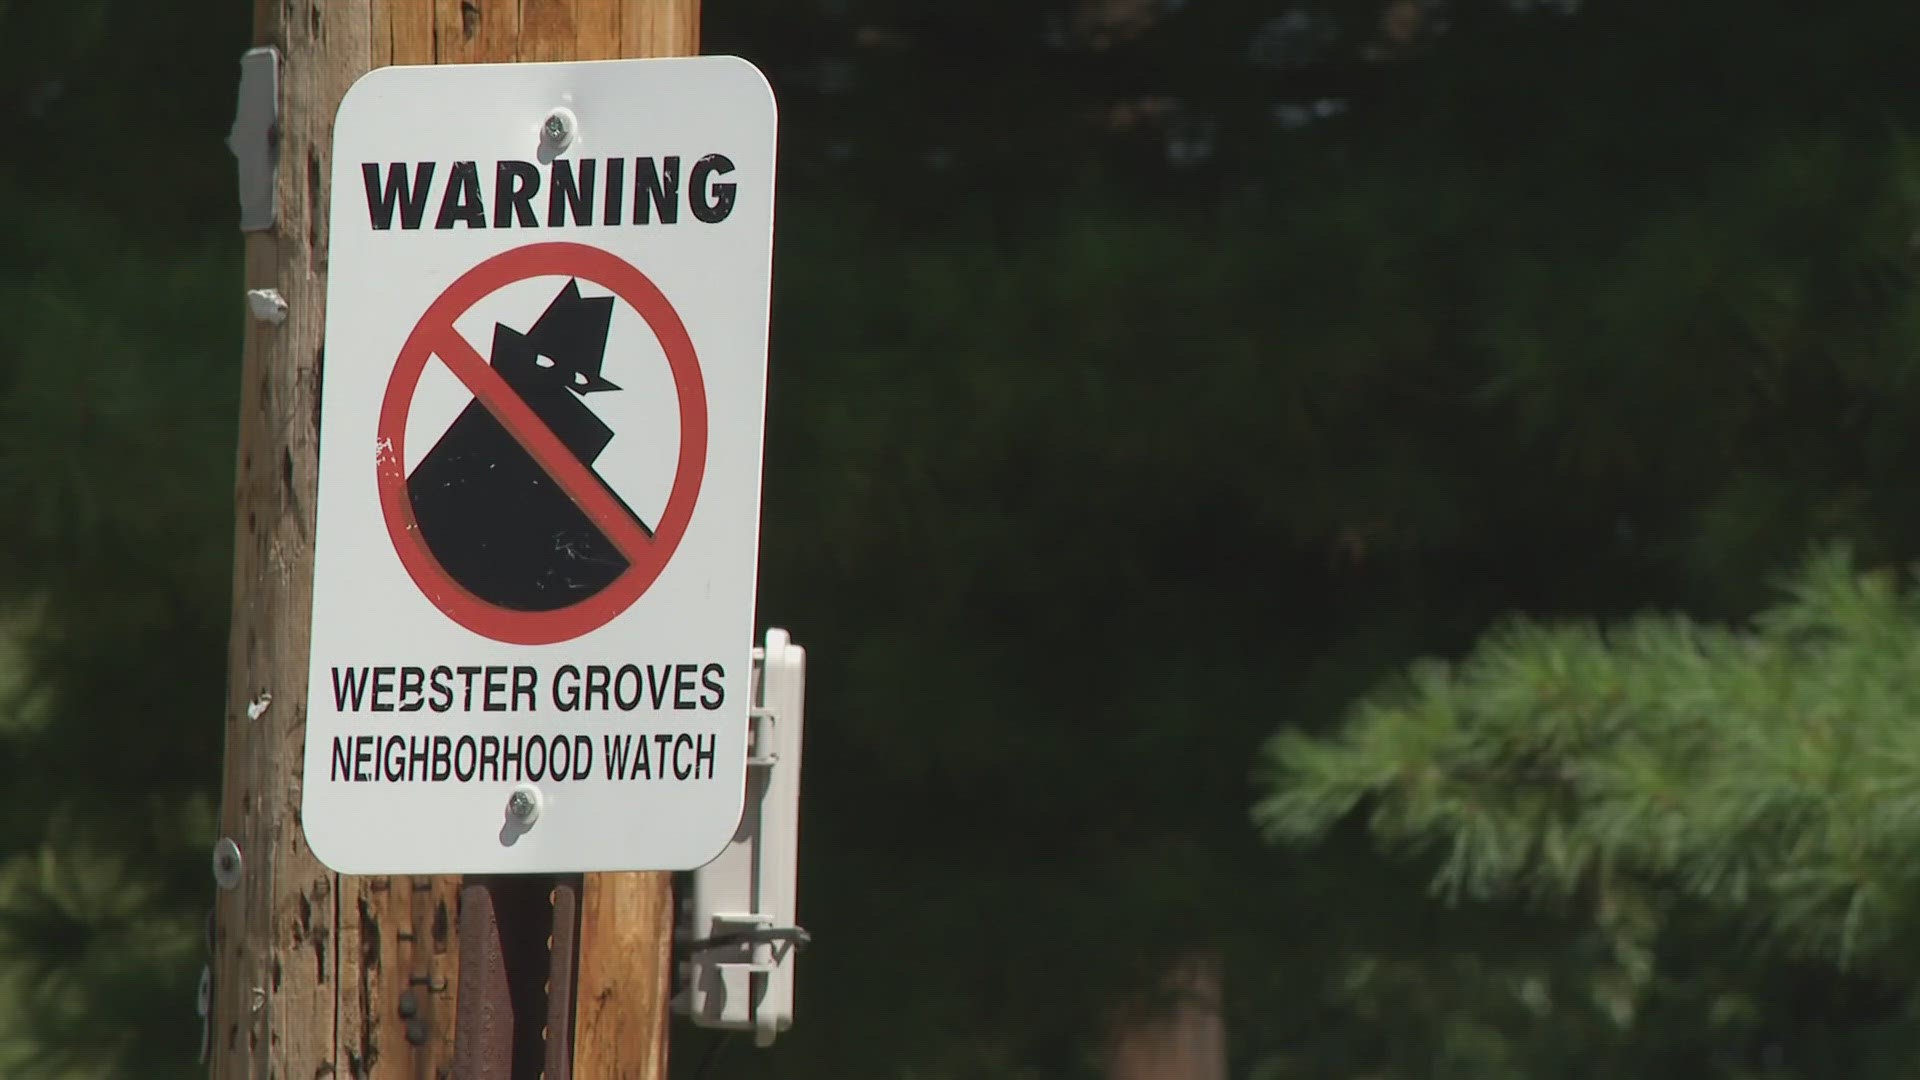 Webster Groves police said they are searching for the suspects involved in a hate crime. The suspects allegedly set fire to several Black Lives Matter signs.